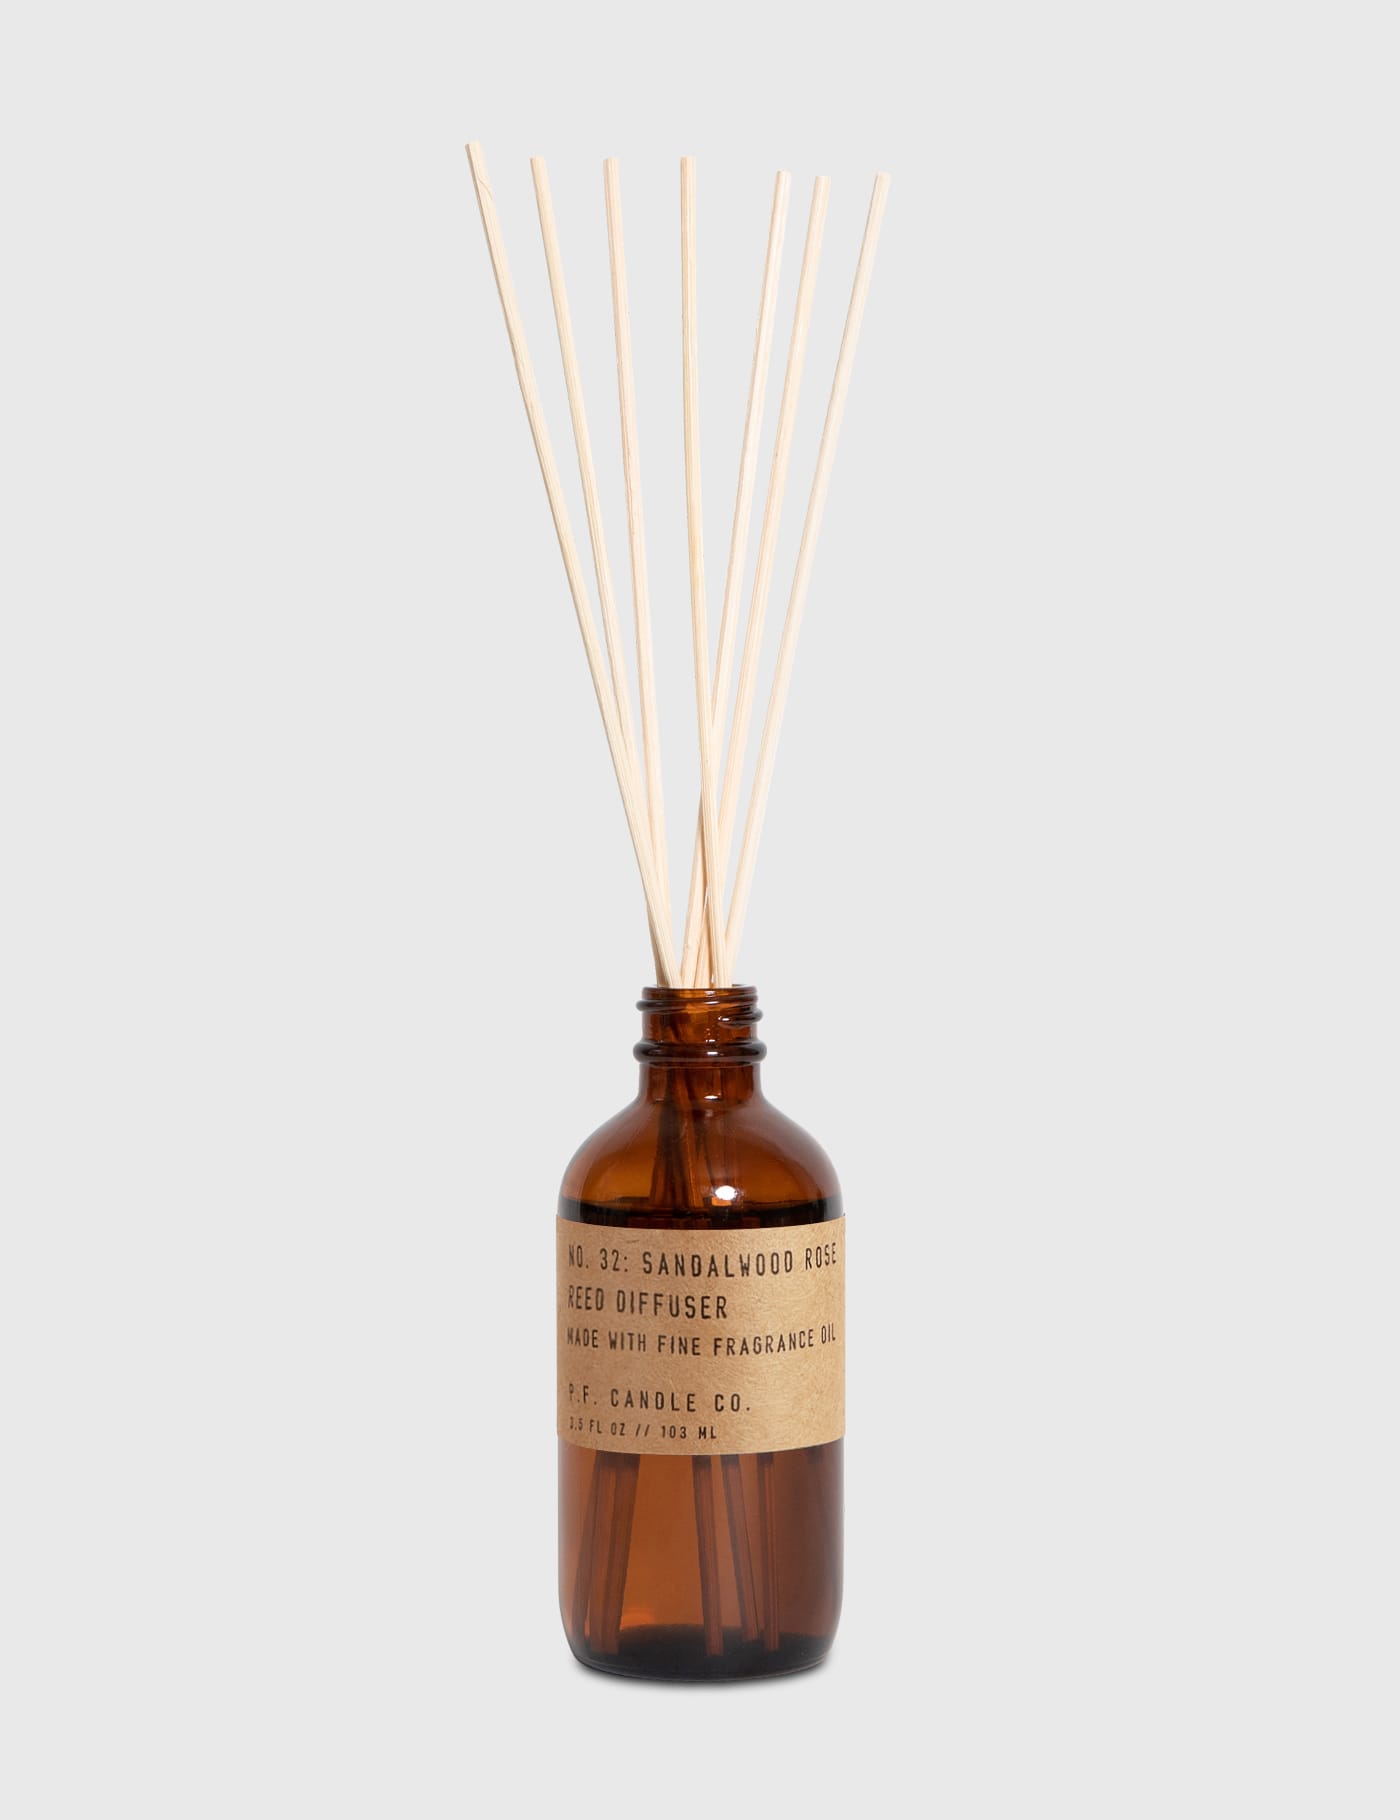 P.F. Candle Co. - Sandalwood Rose Reed Diffuser | HBX - Globally